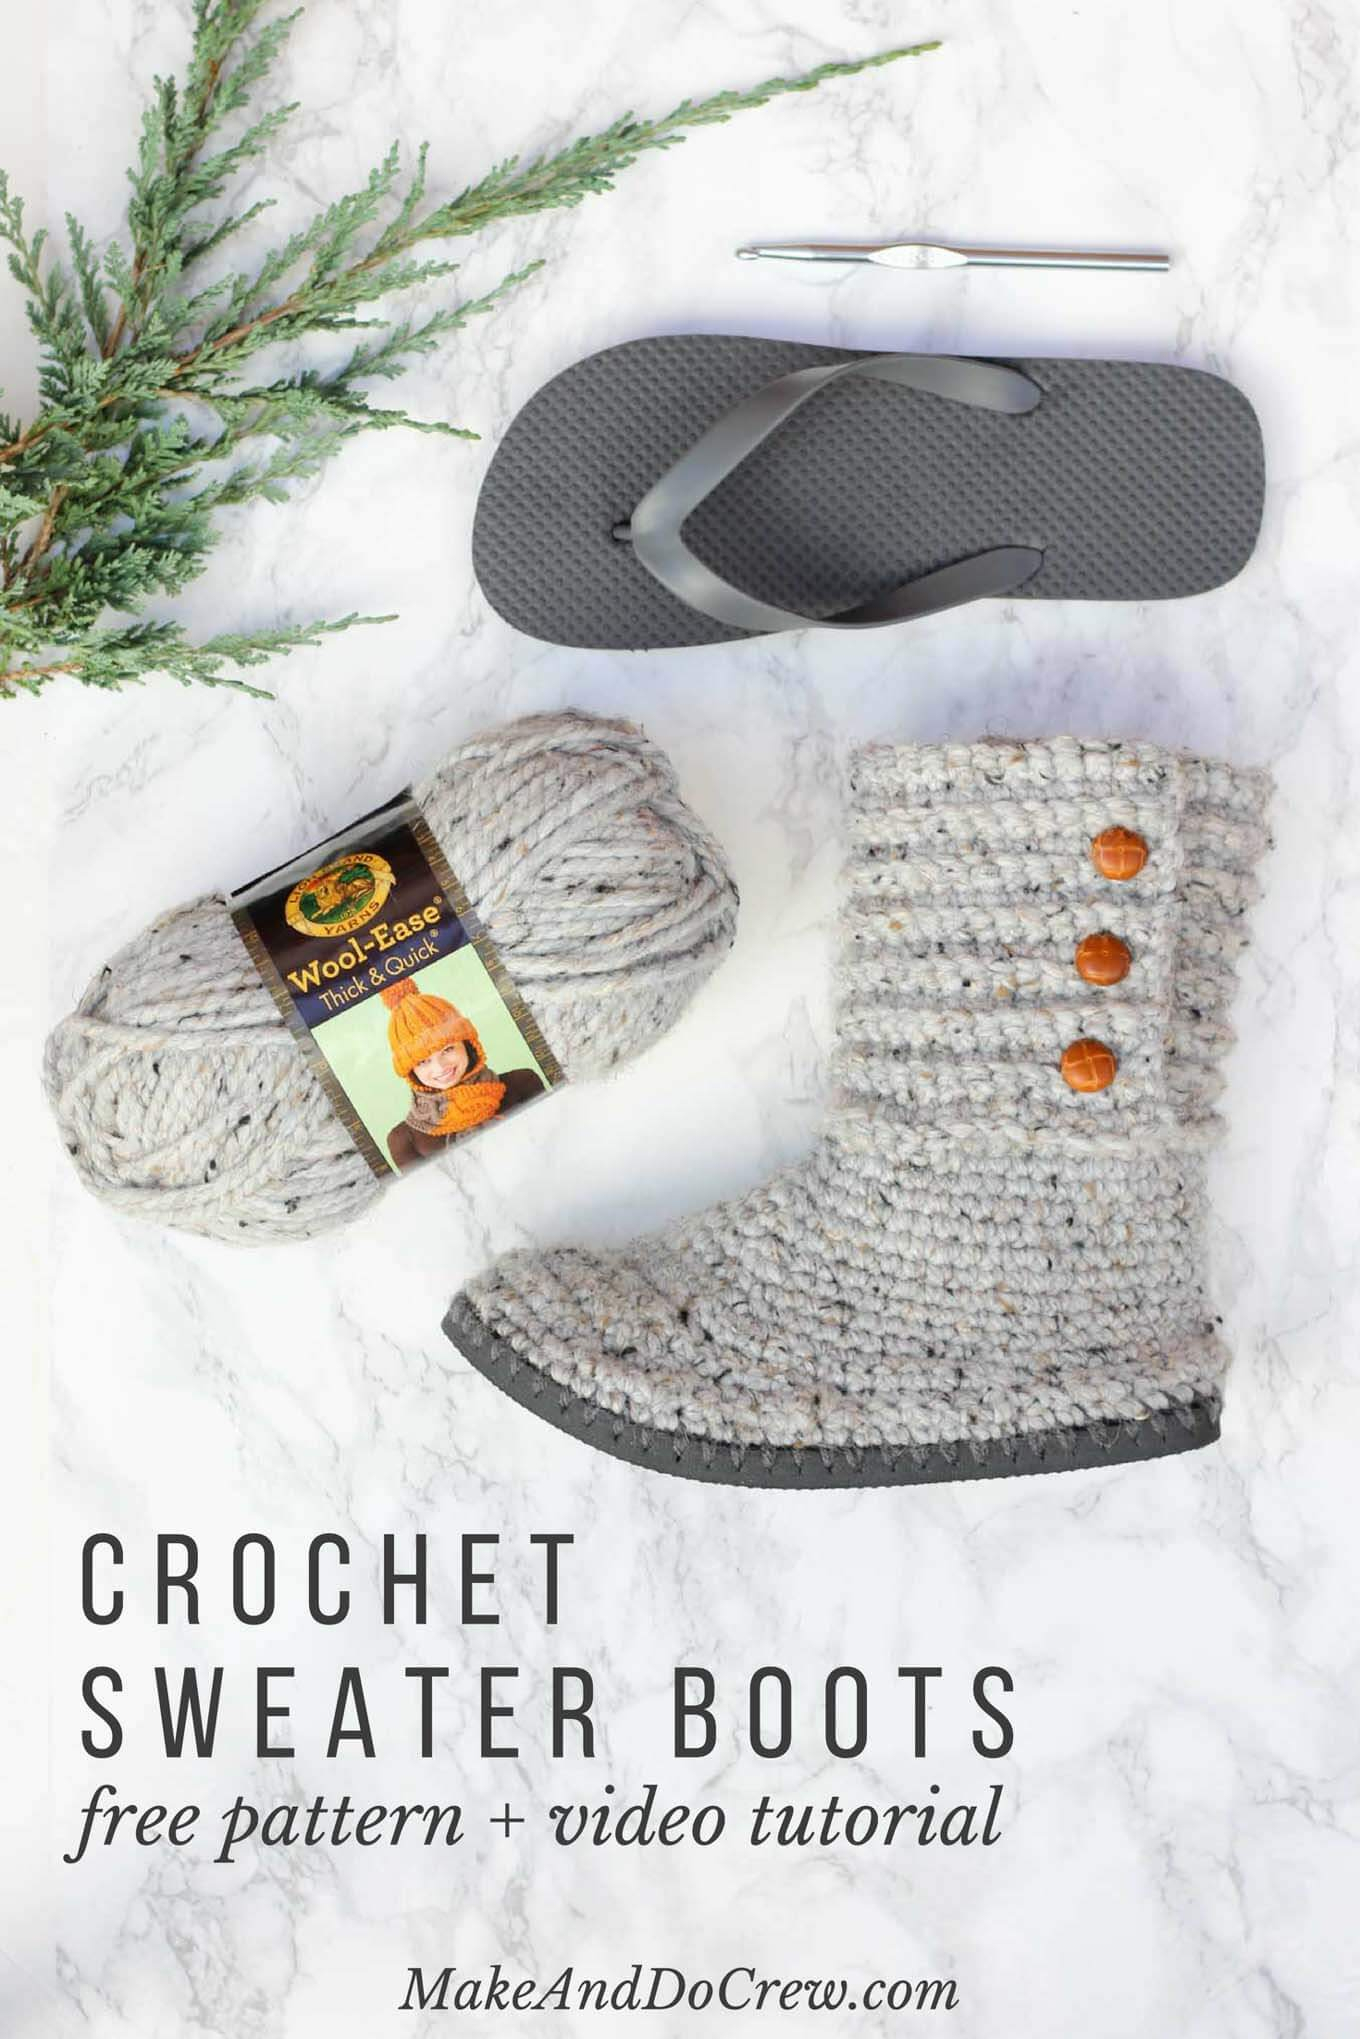 Crochet Slipper Boots Free Pattern How To Crochet Boots With Flip Flops Free Pattern Video Tutorial